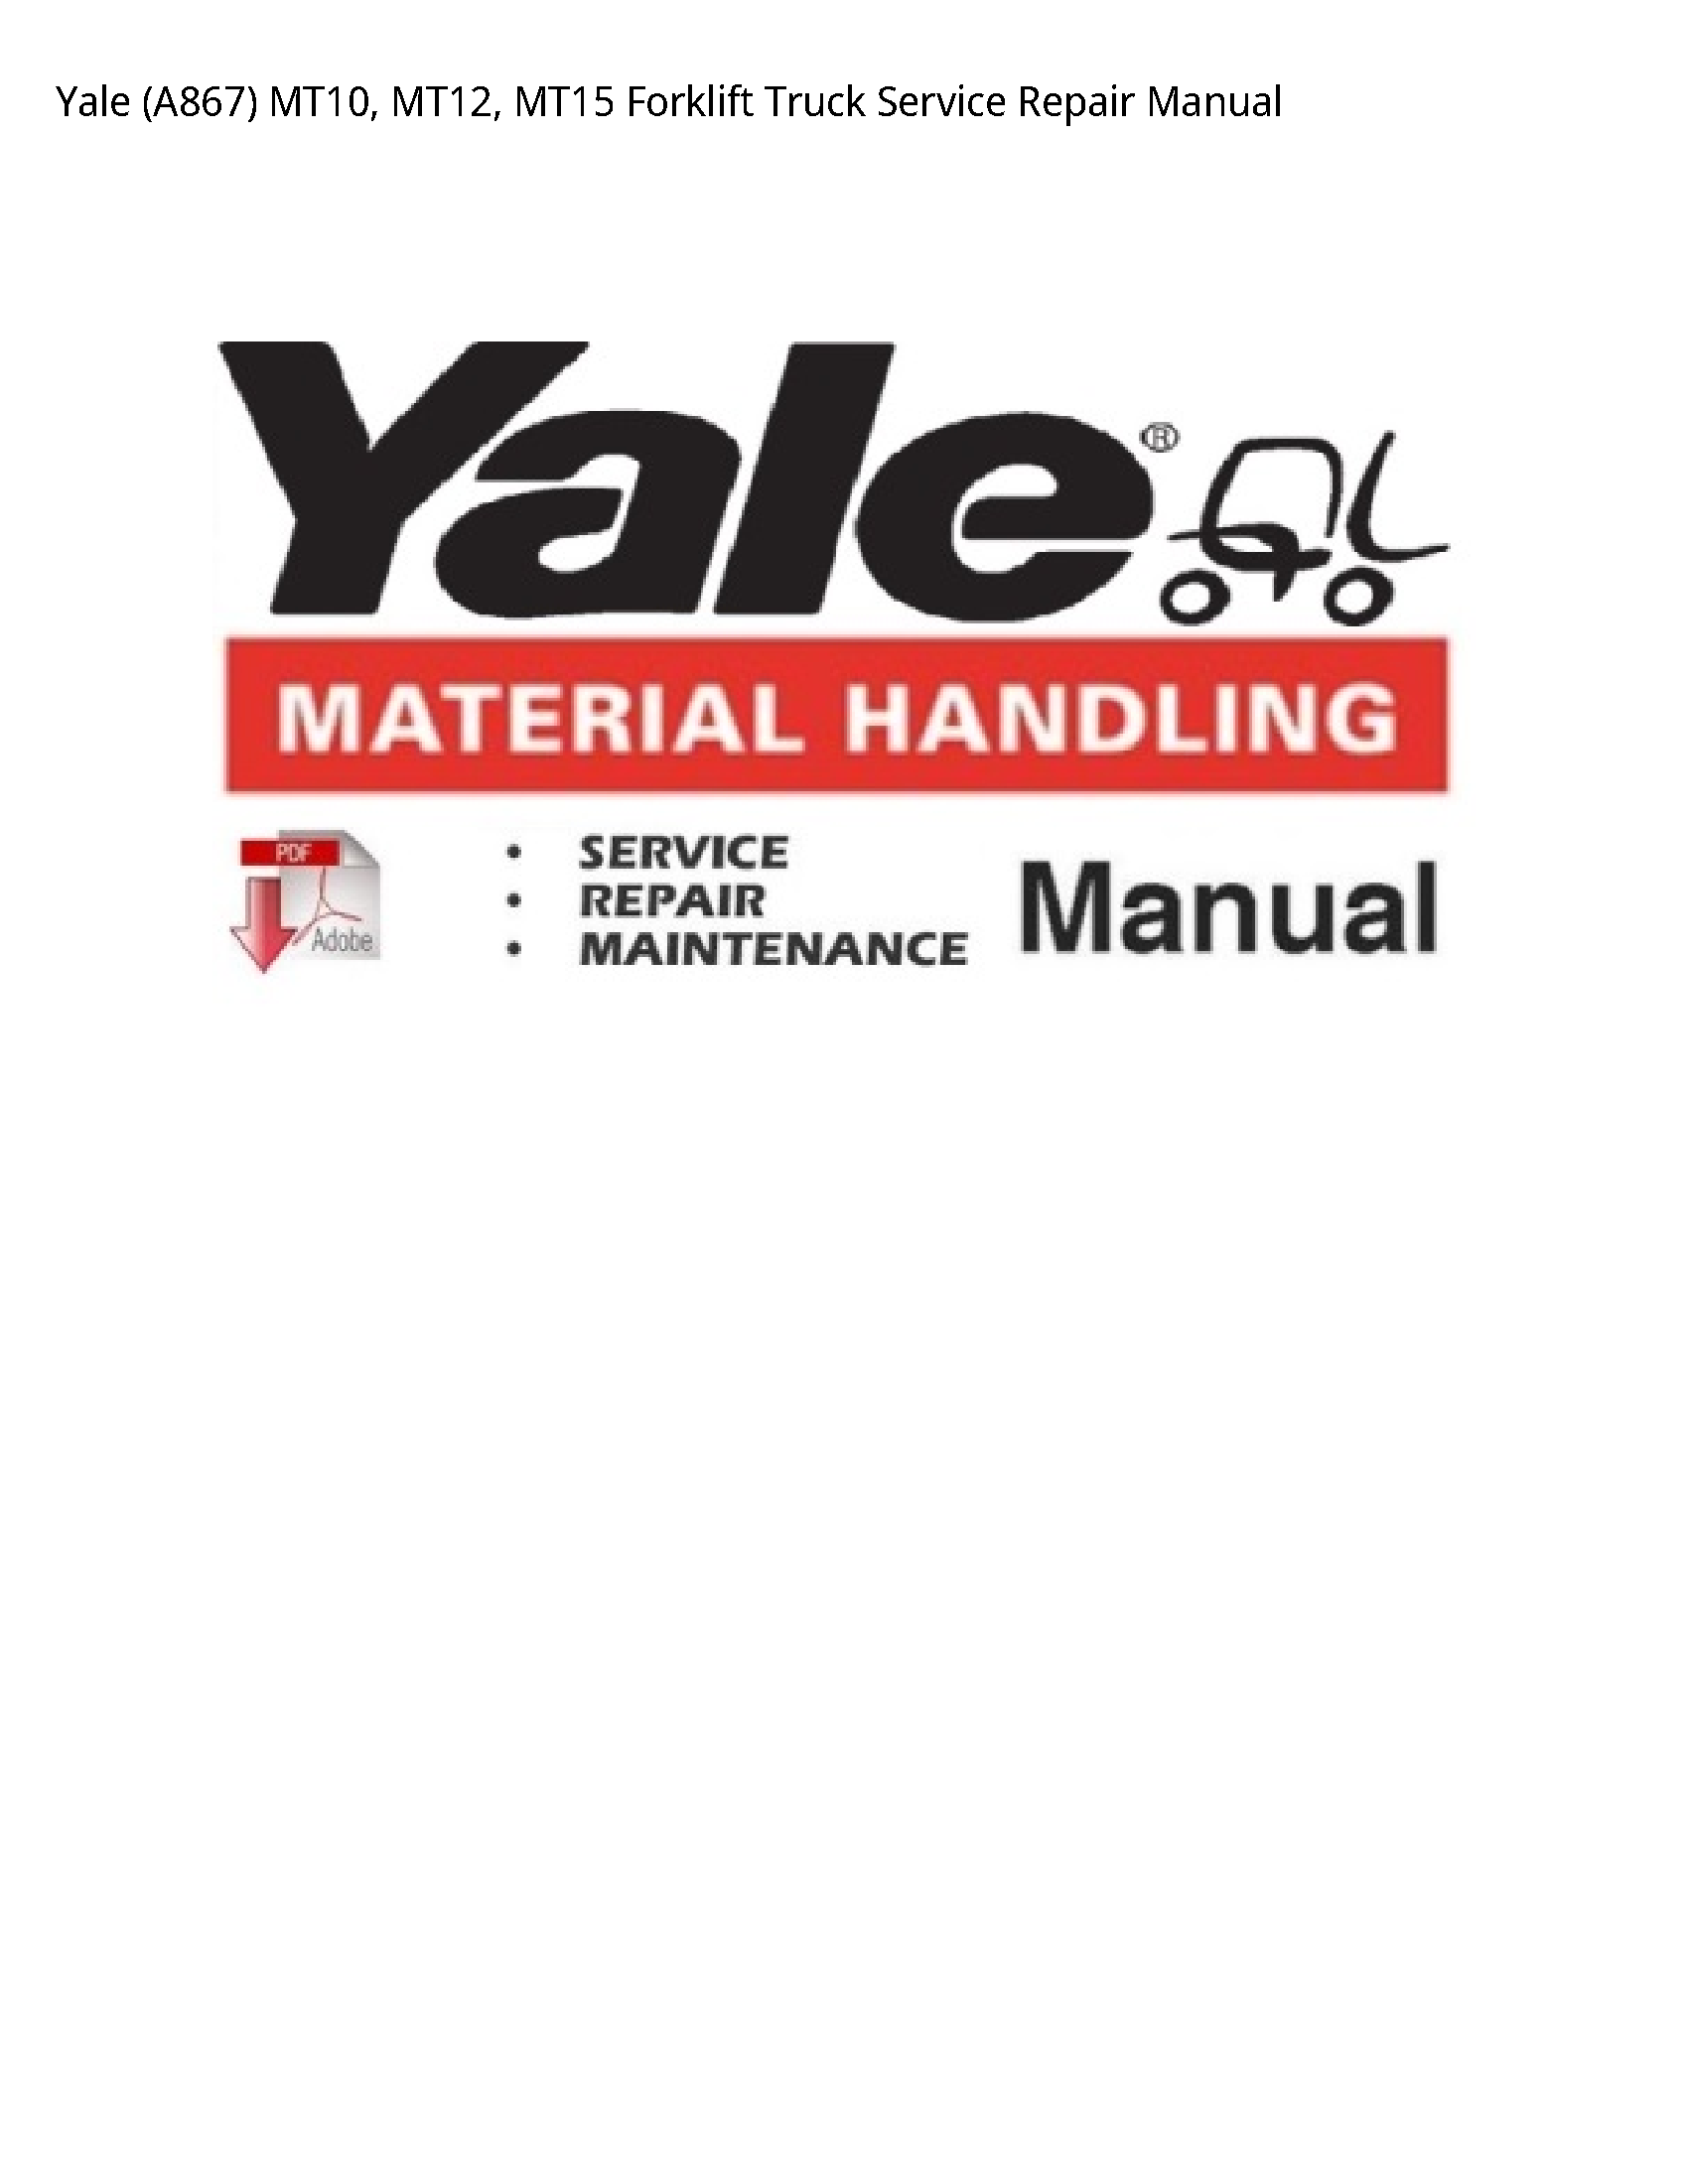 Yale (A867) Forklift Truck manual